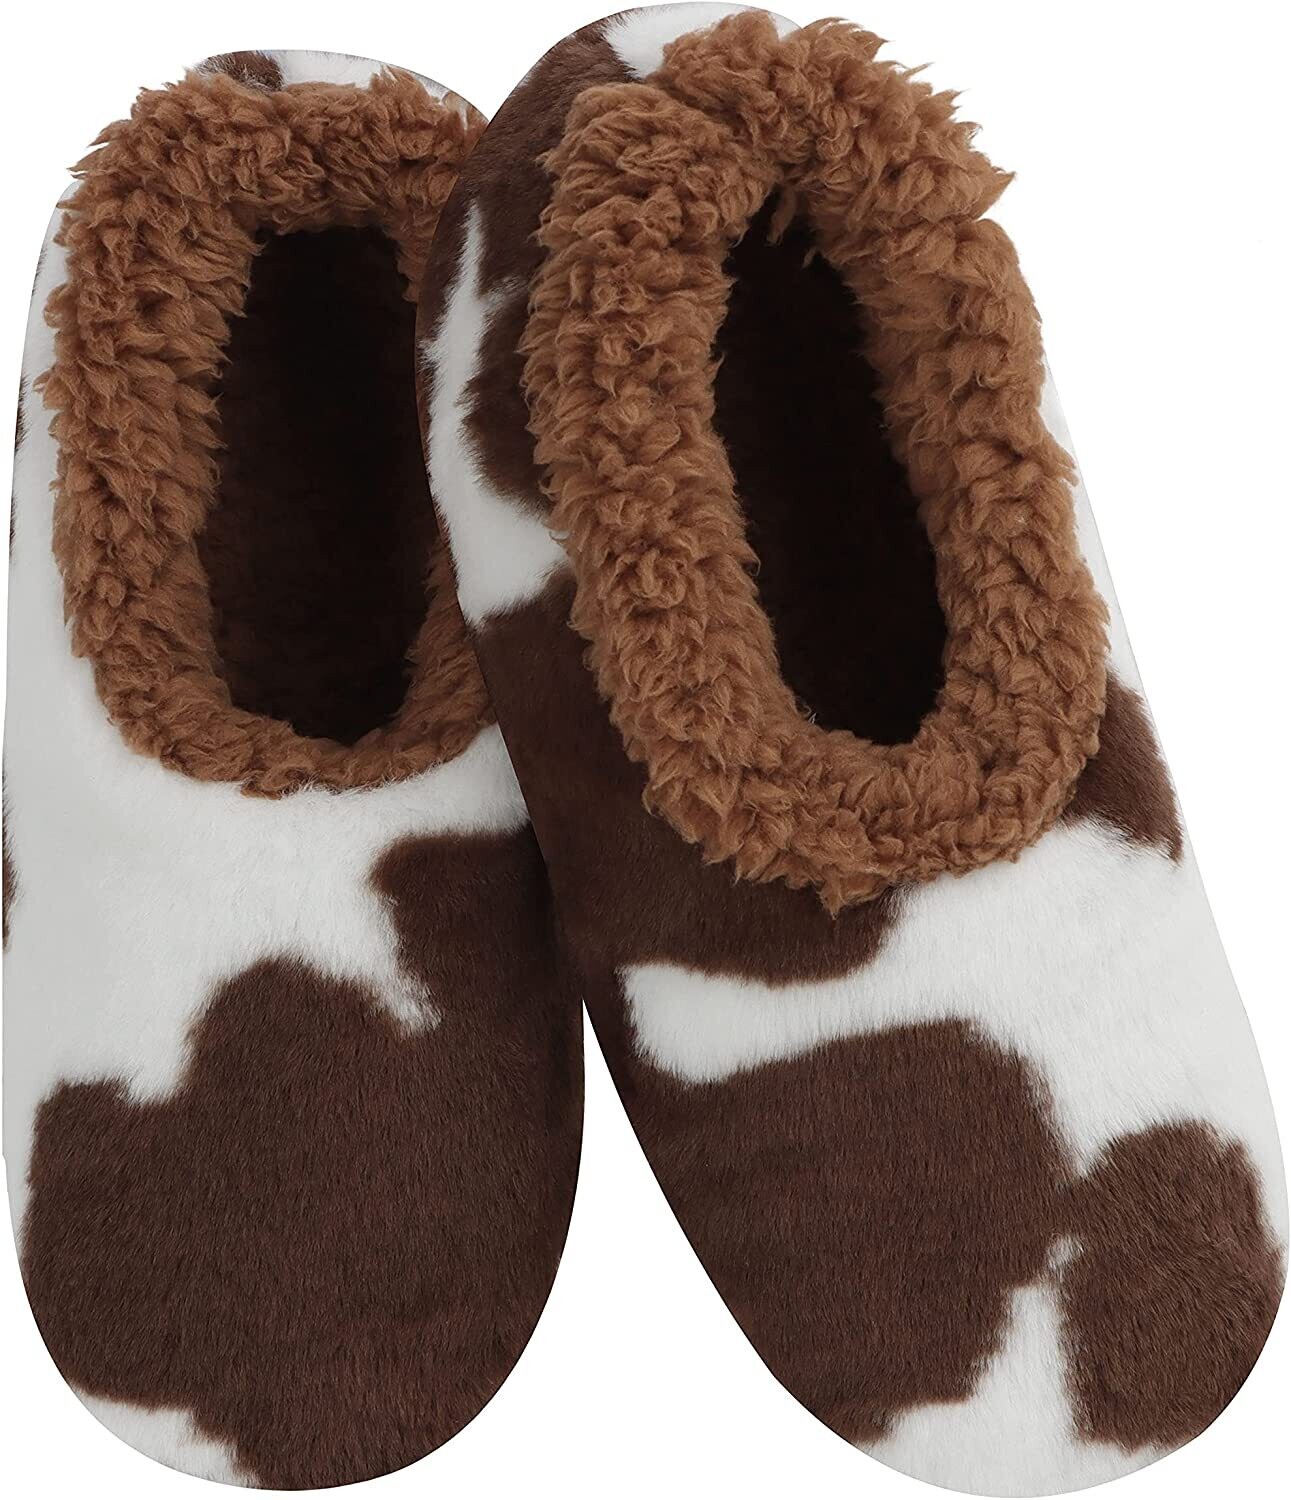 Holy Cow Slippers Brown & White